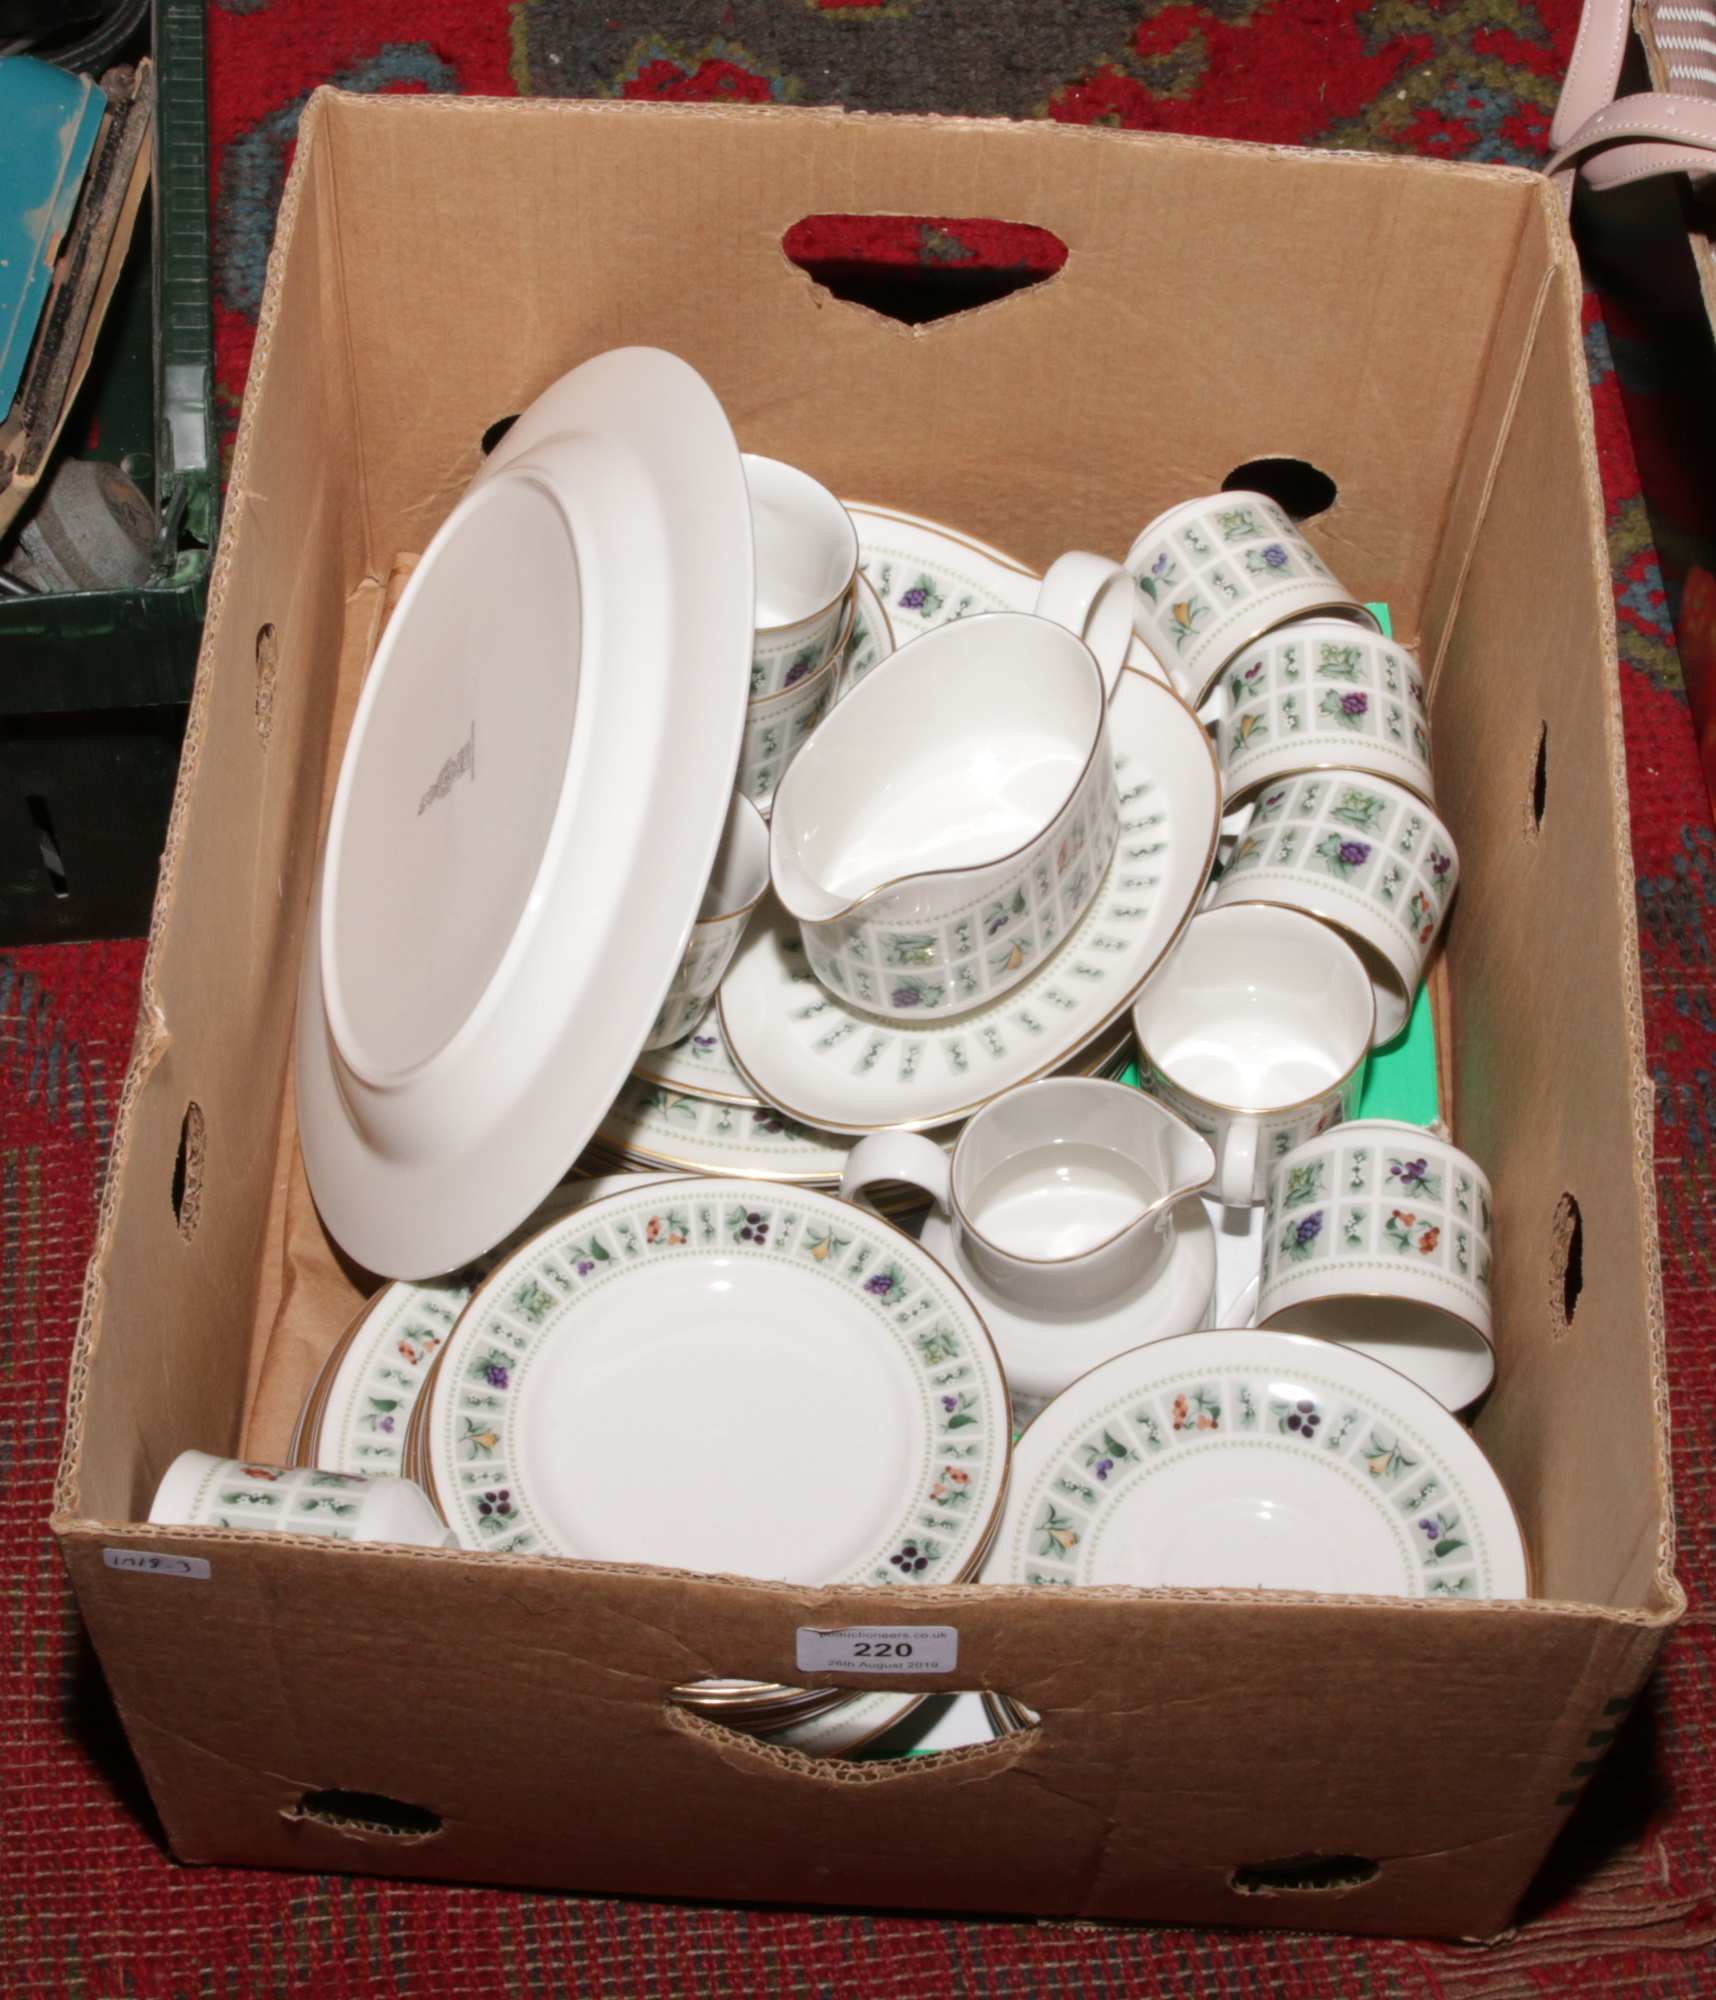 A collection of Royal Doulton tapestry design dinnerwares, approximately 40 pieces.